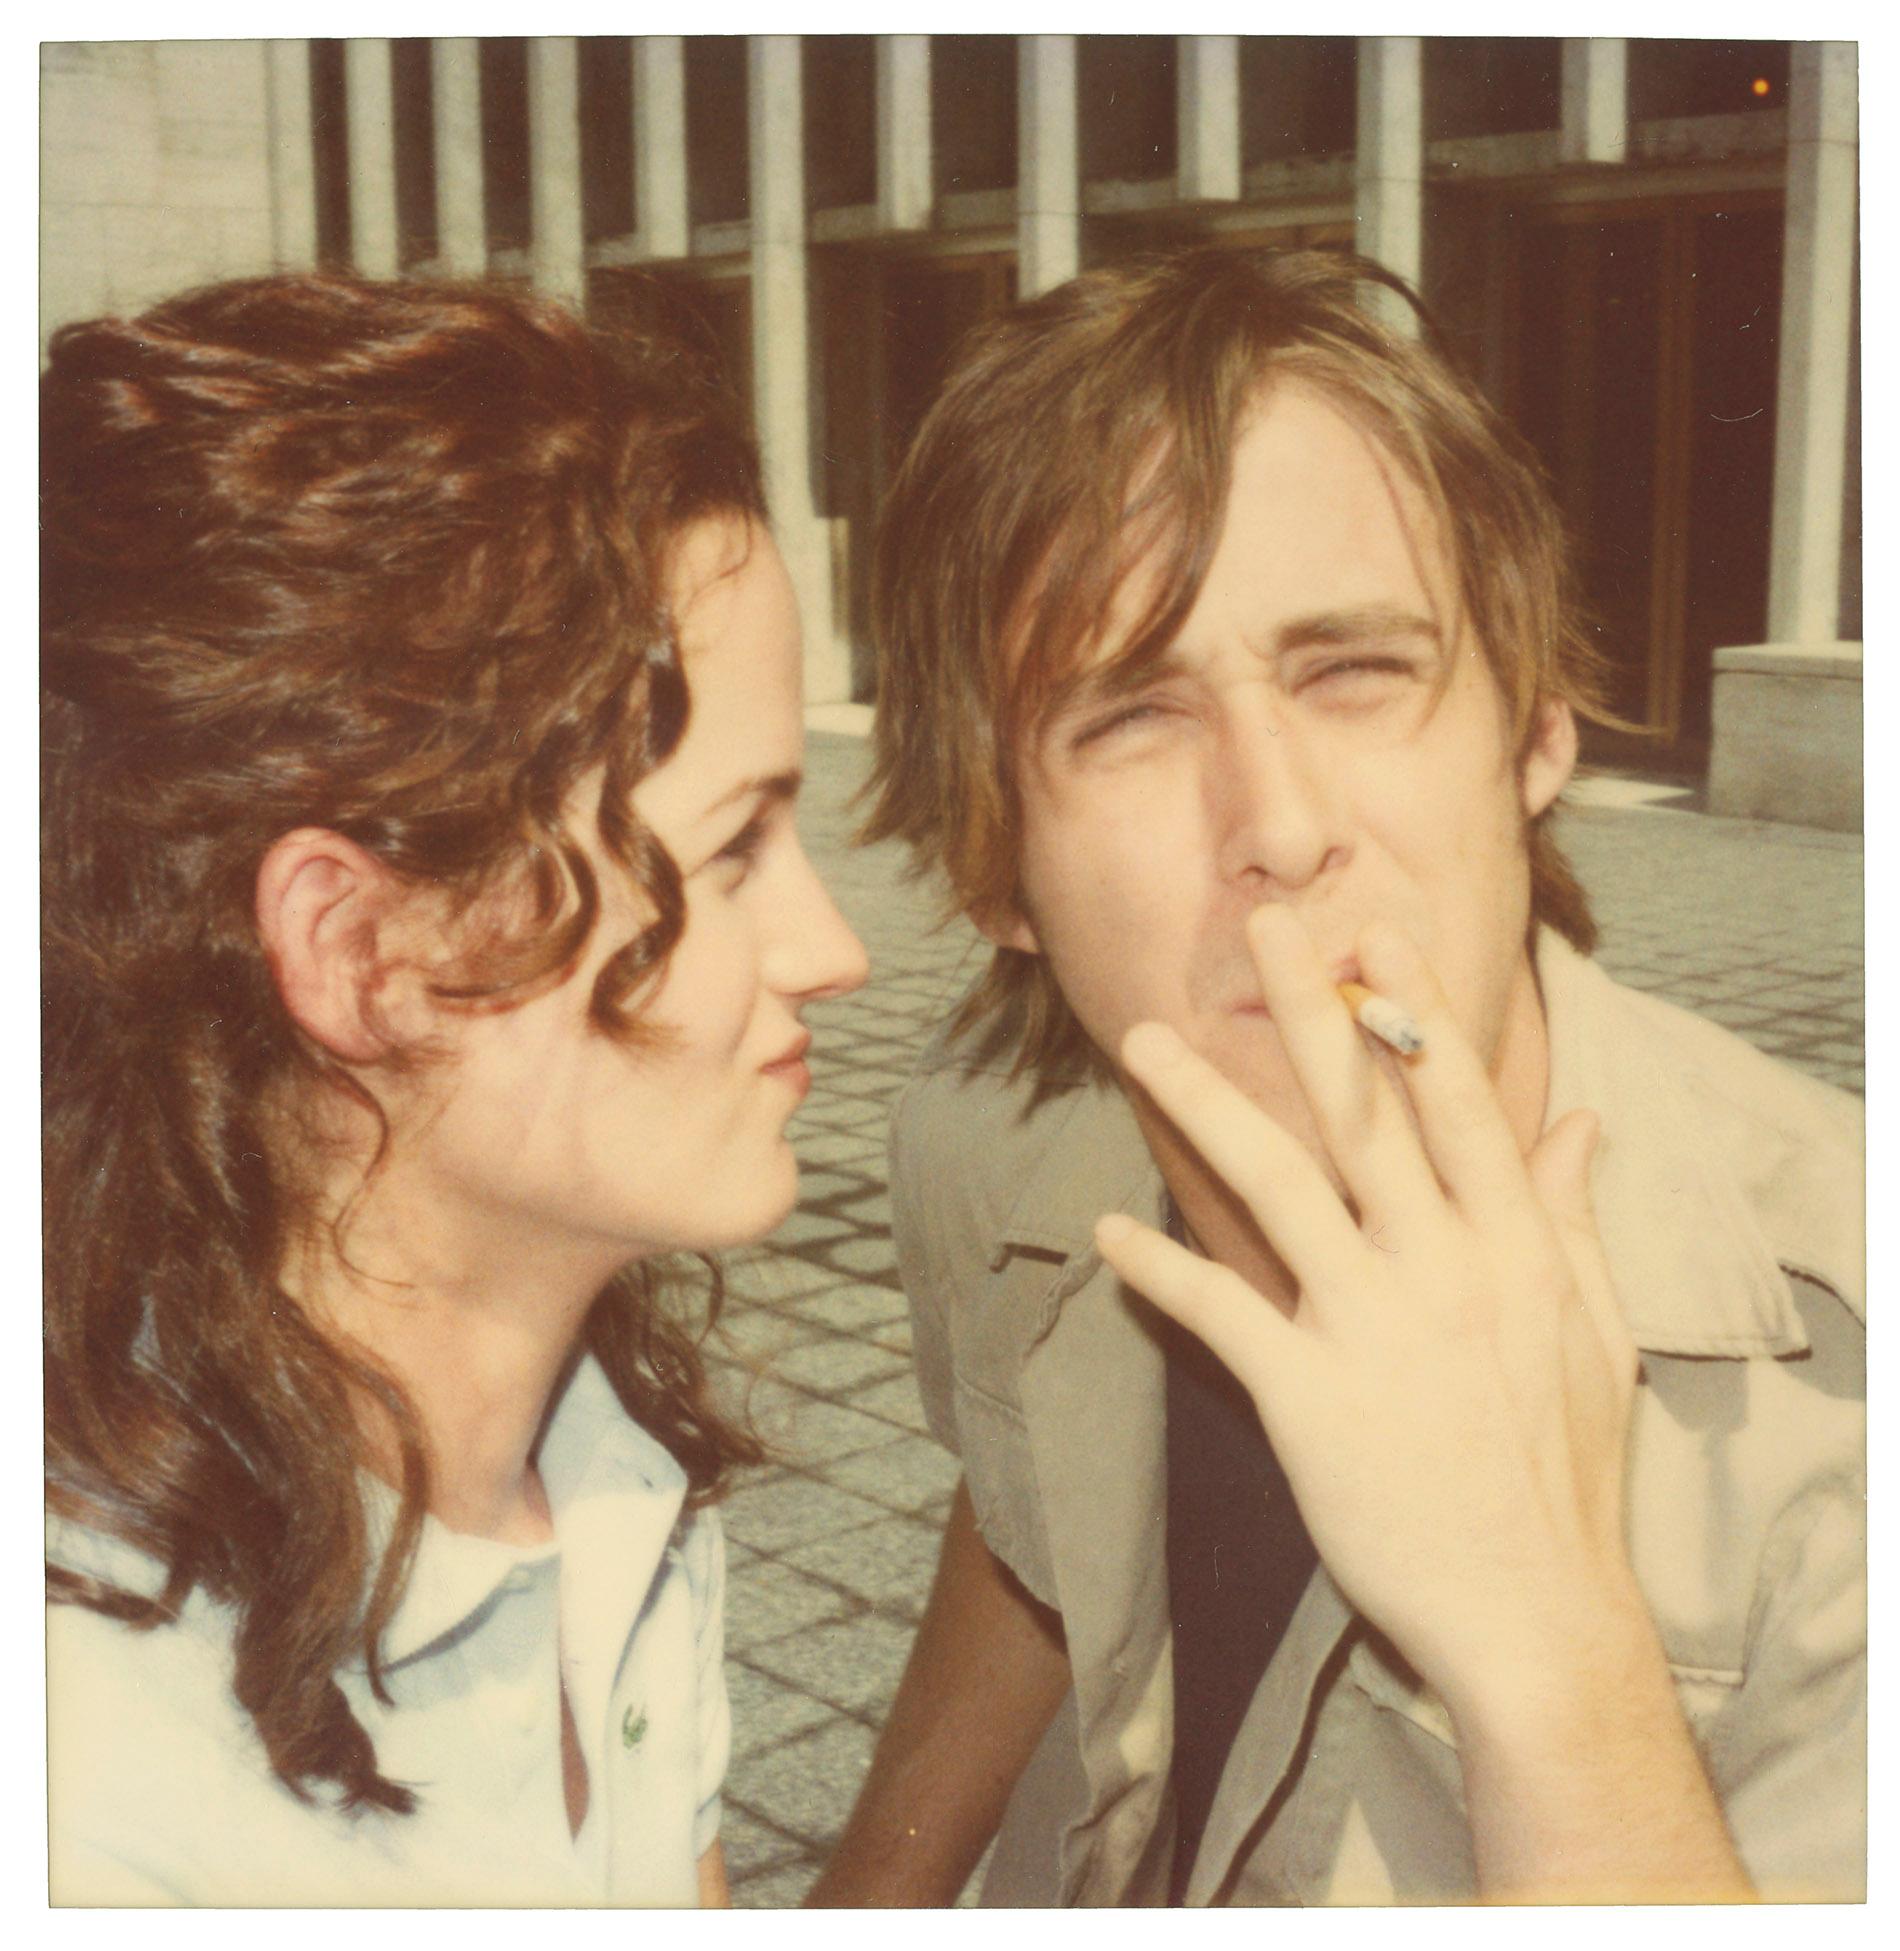 Stefanie Schneider Landscape Photograph - Athena and Henry (Stay) - featuring Ryan Gosling and Elizabeth Reaser - Polaroid